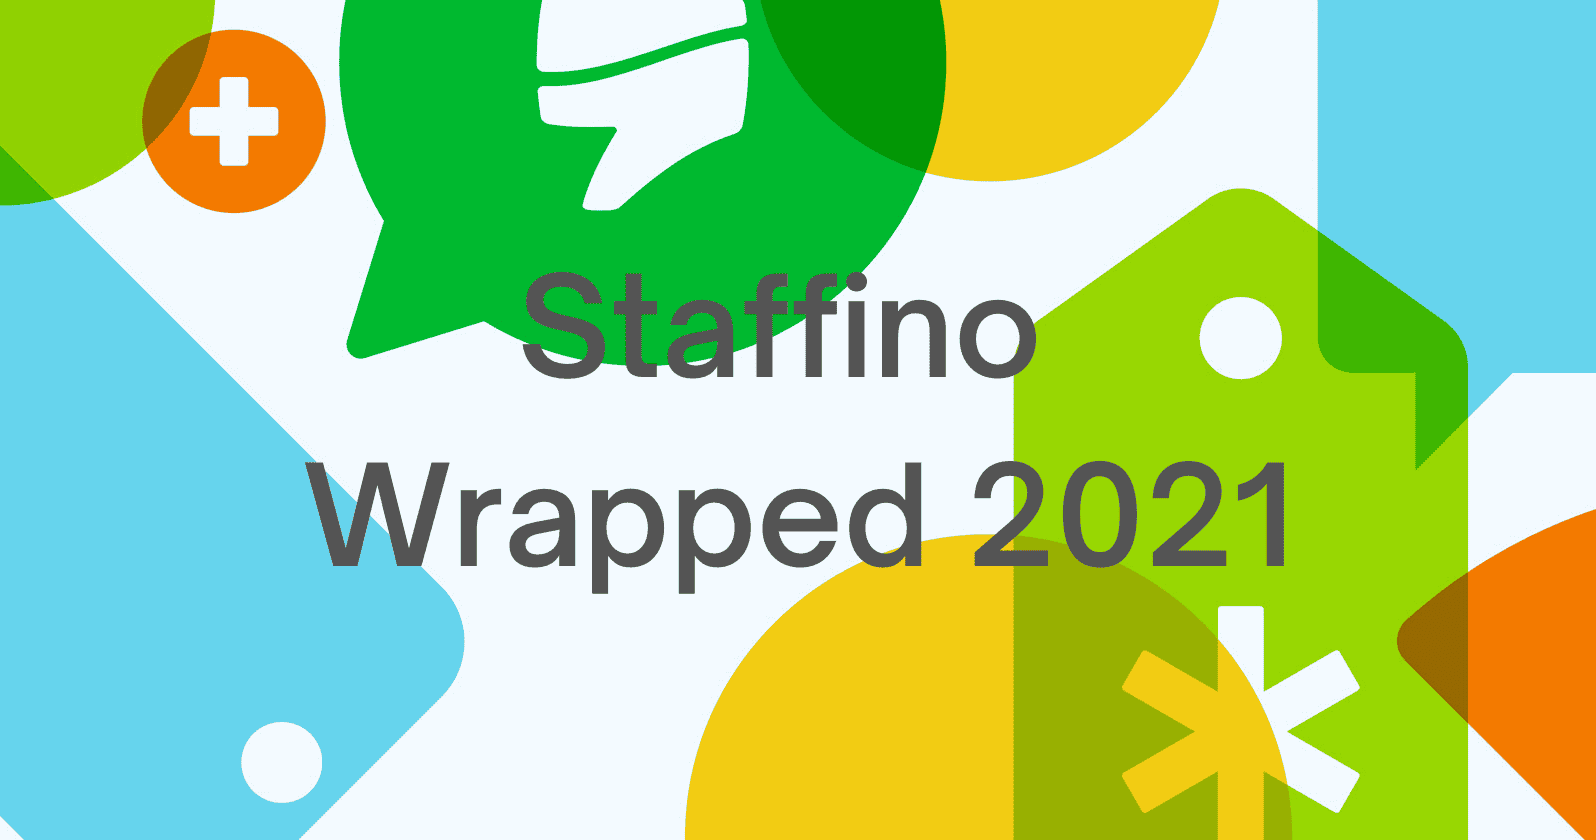 Staffino Wrapped 2021